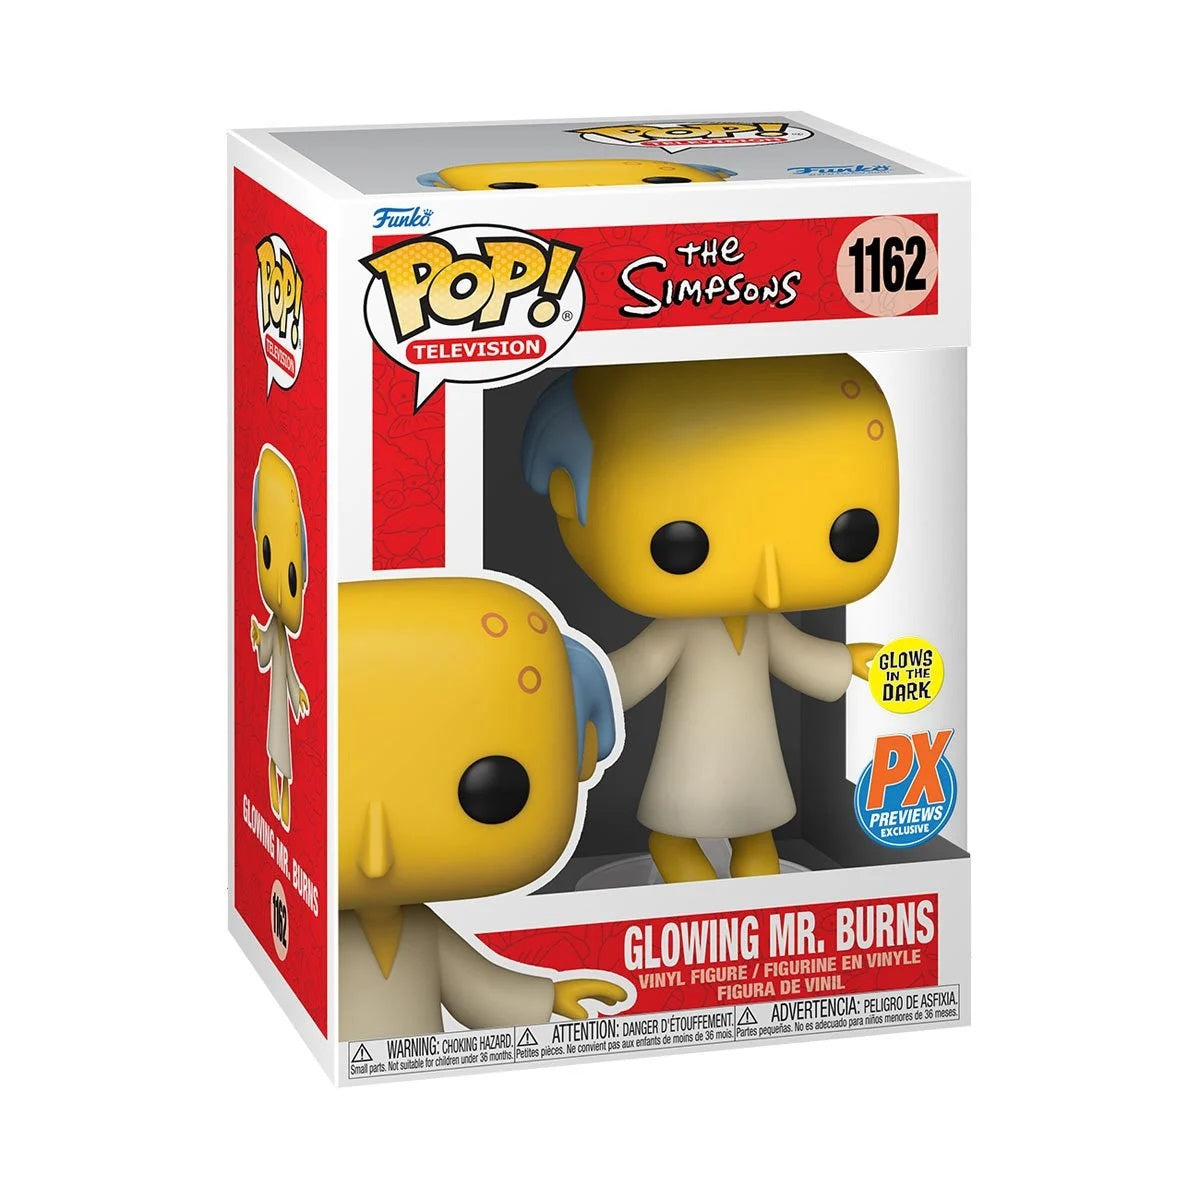 Pop! Television - The Simpsons - Mr. Burns [Glow][PX Exclusive]